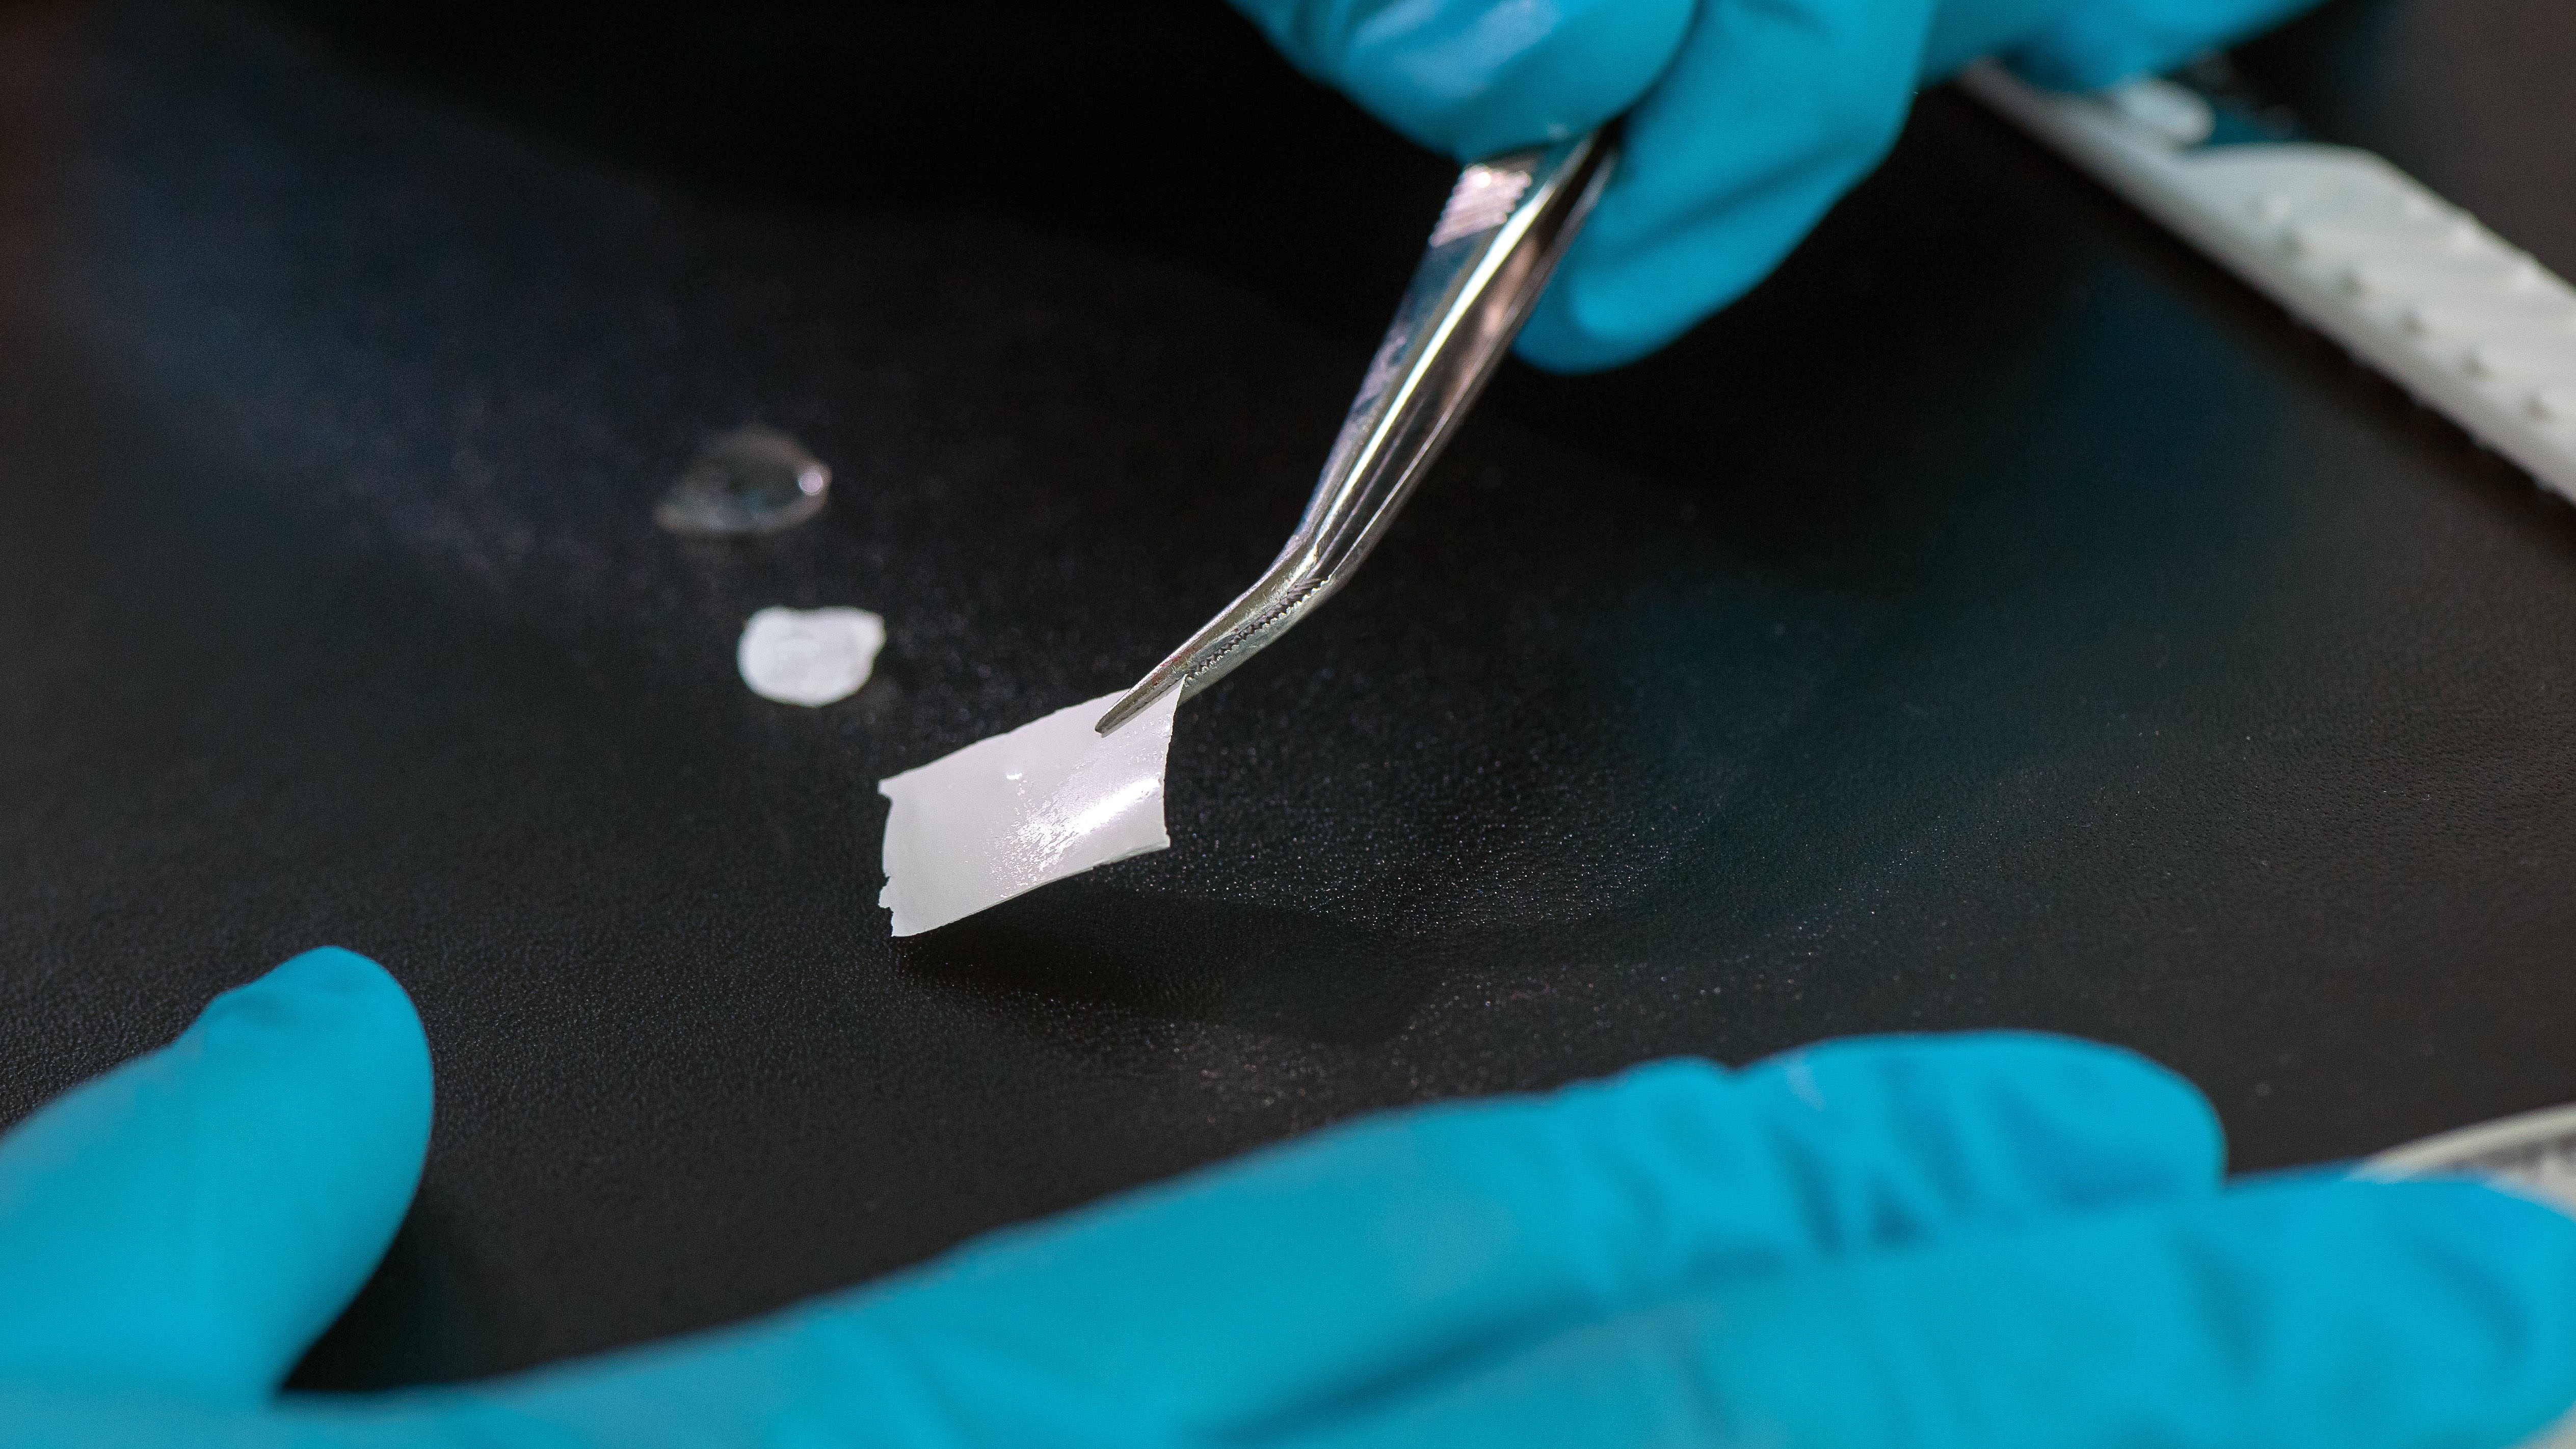 biomolecular film can be picked up with tweezers